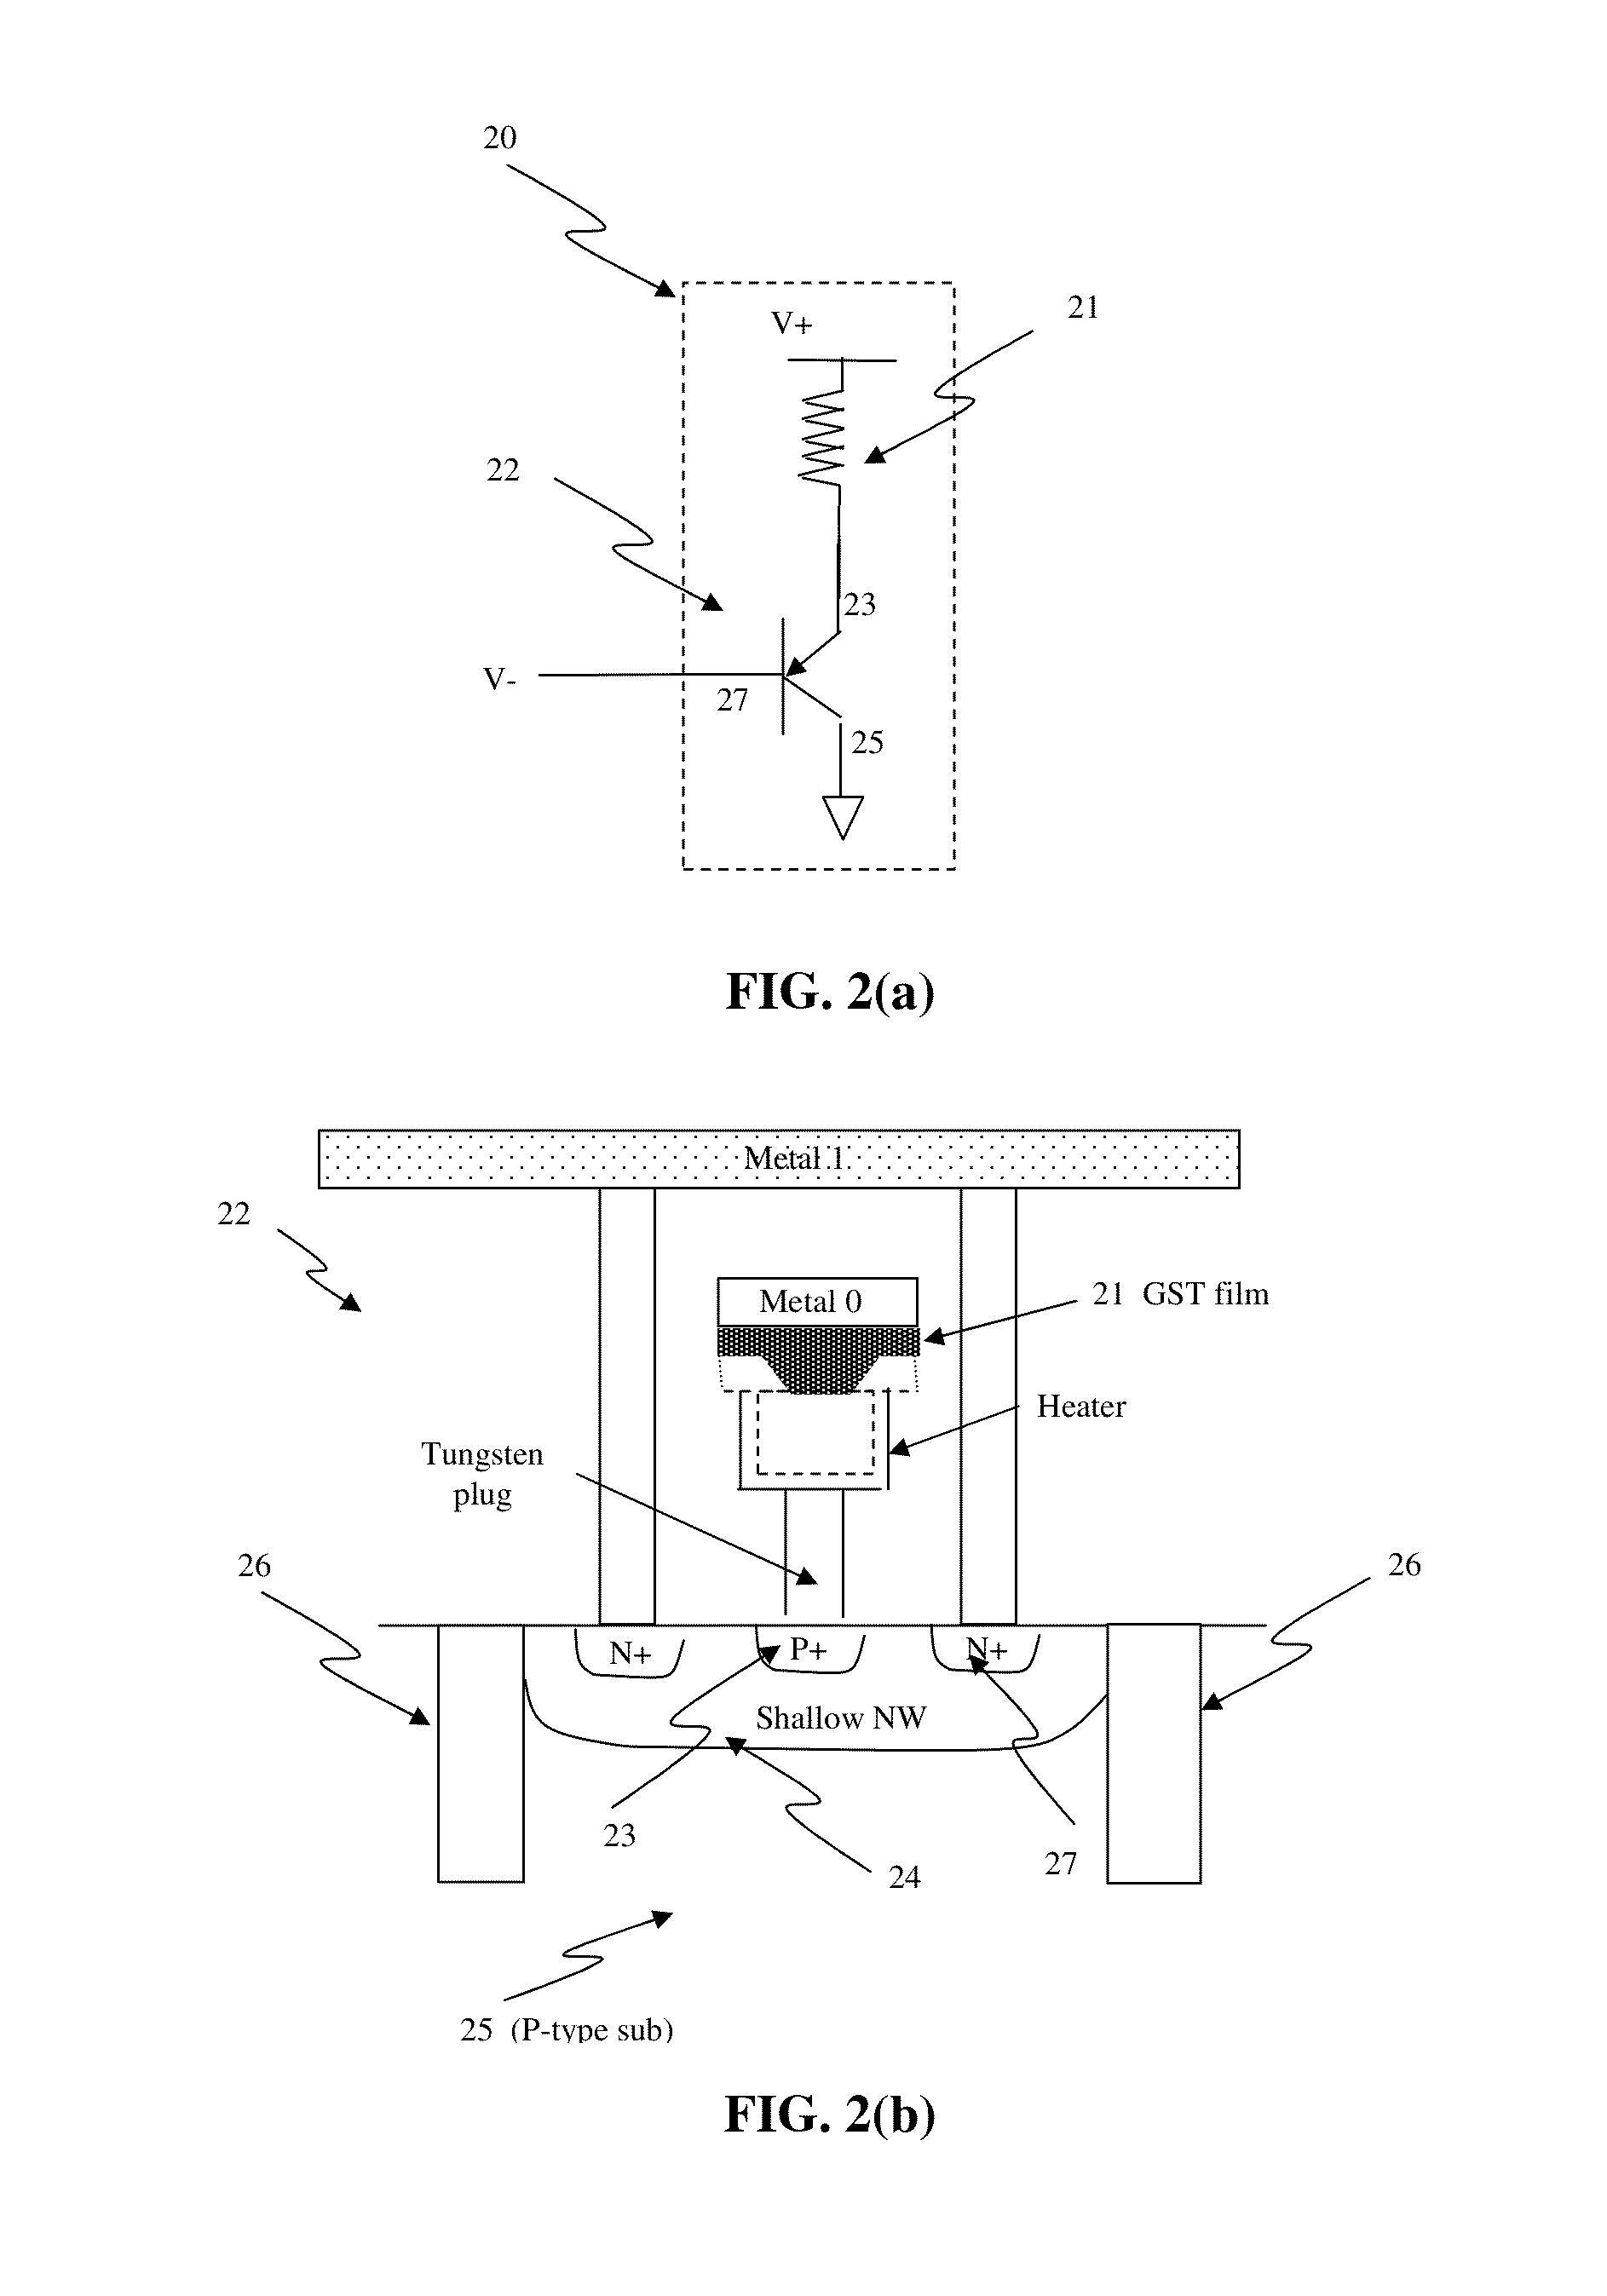 Circuit and System of Using Junction Diode as Porgram Selector for One-Time Programmable Devices with Heat Sink